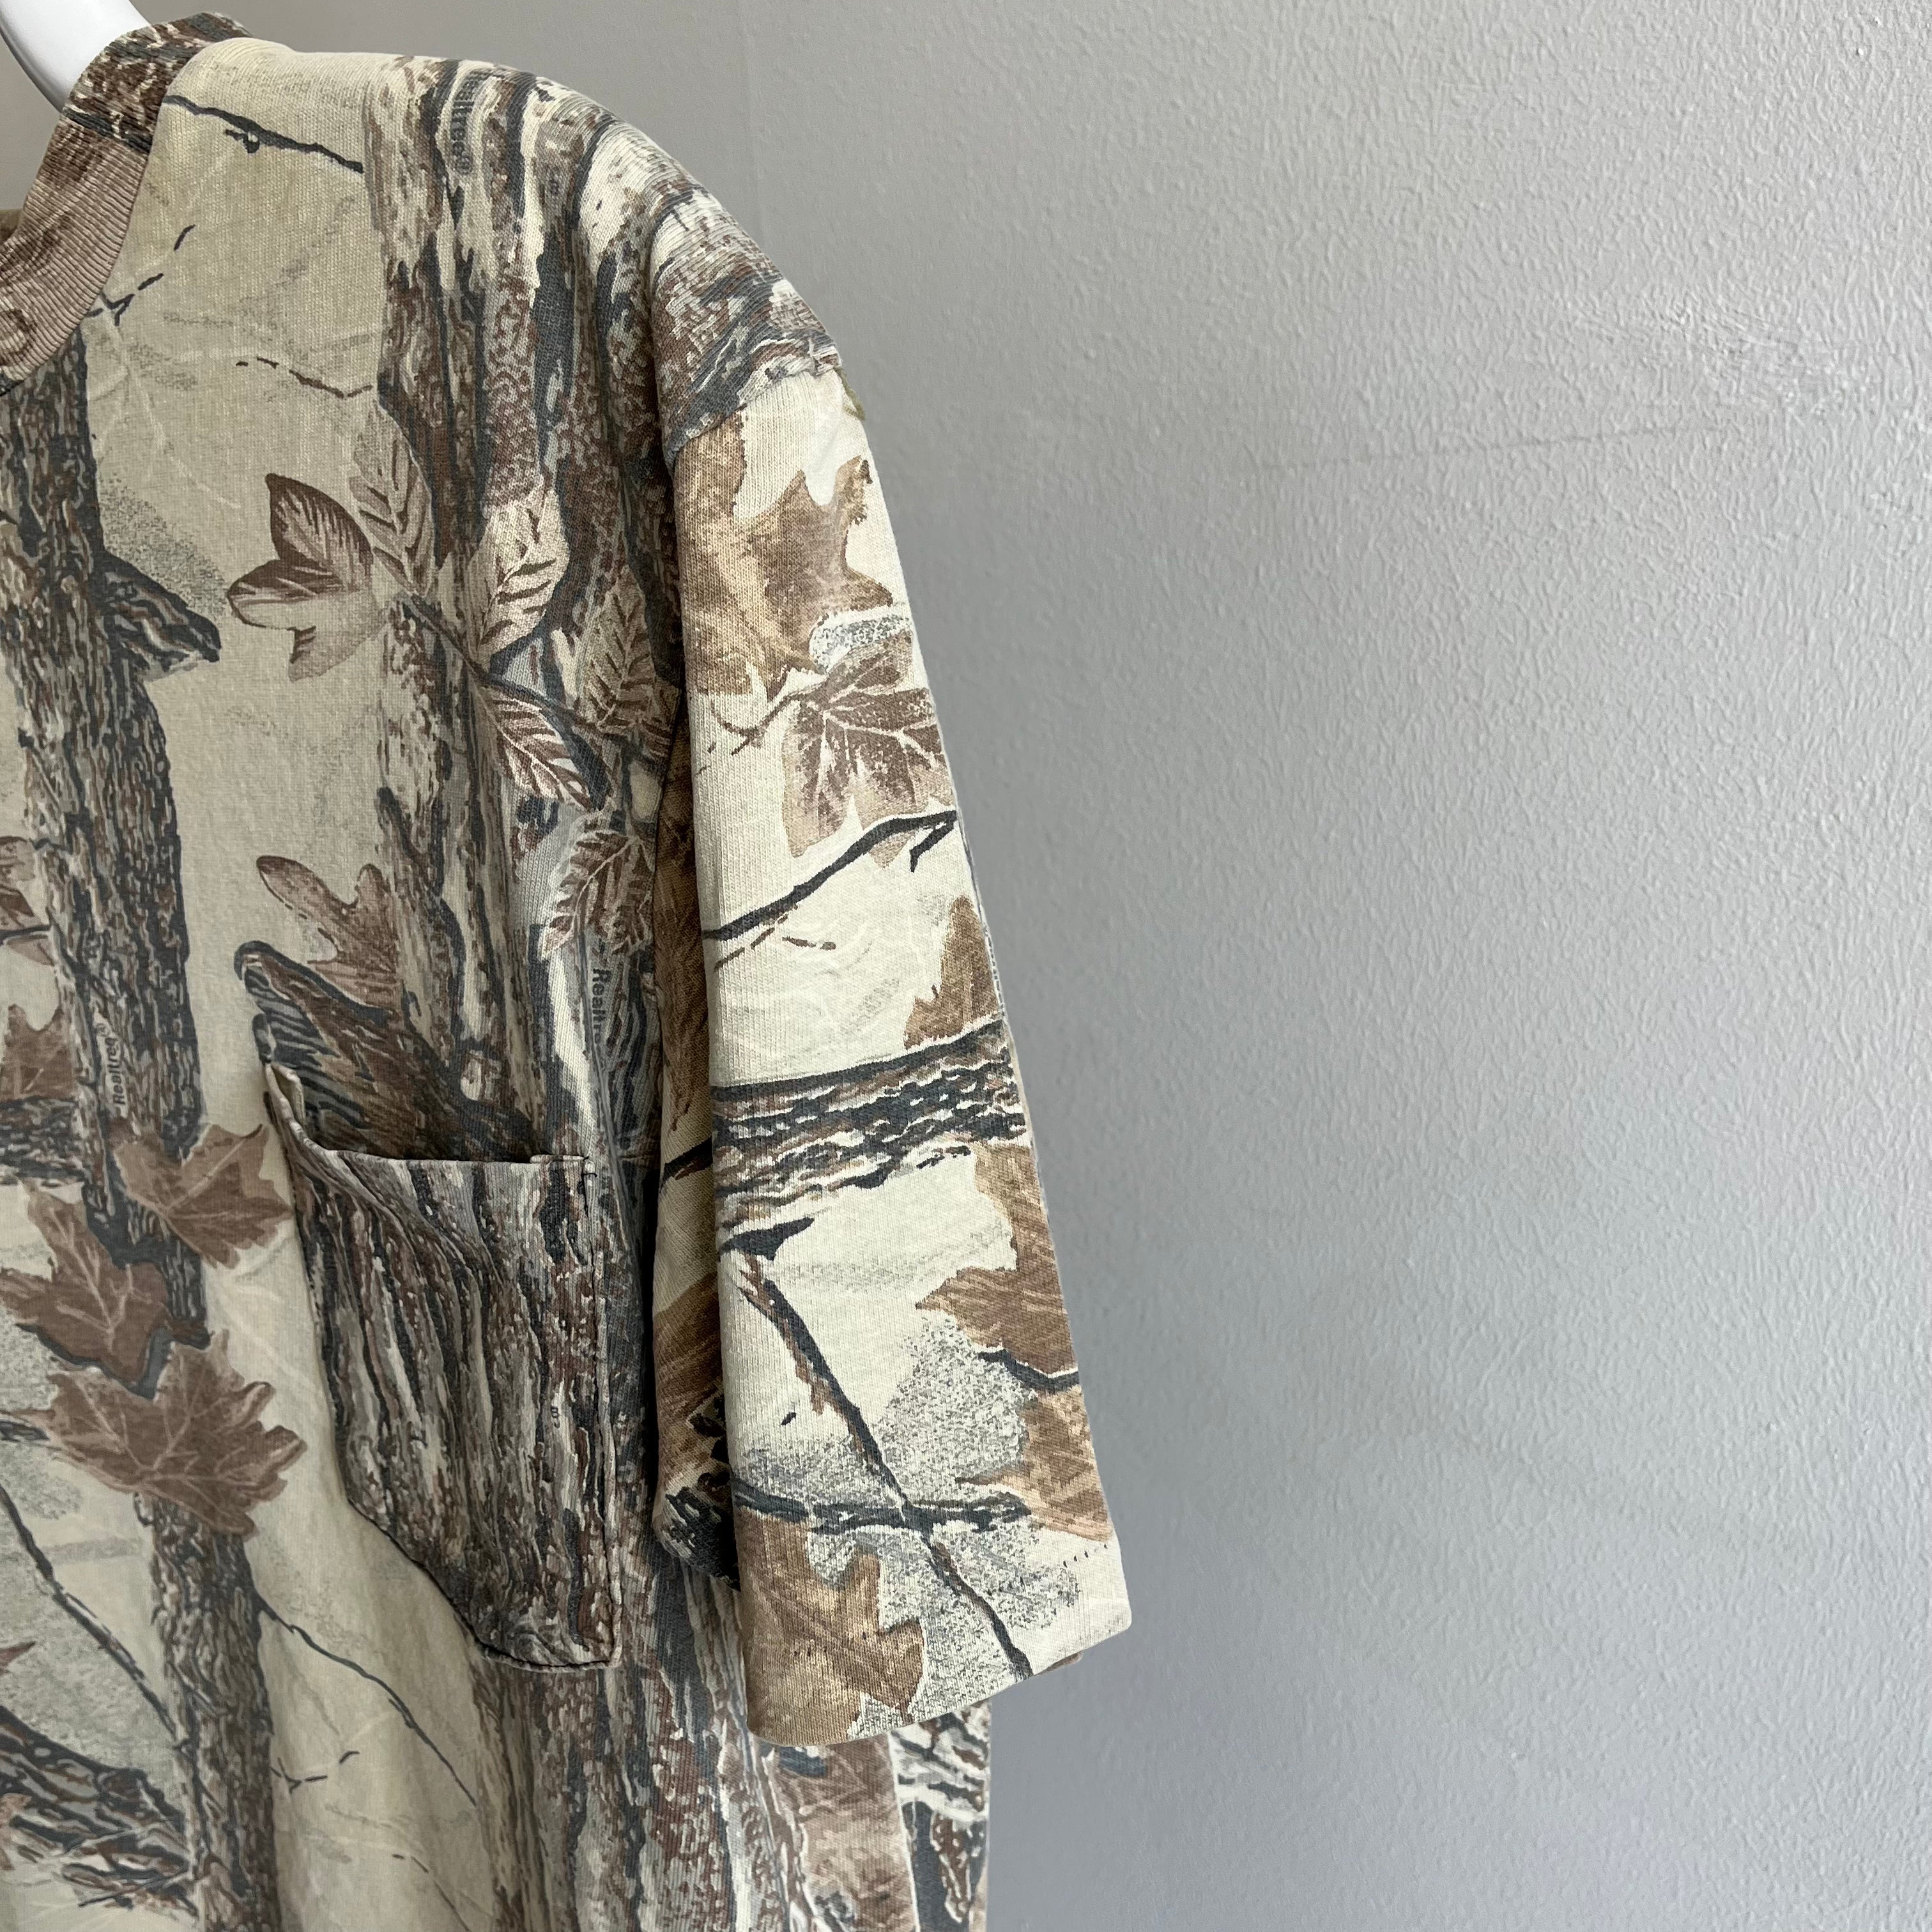 1990s Real Trees Camo Cotton T-Shirt